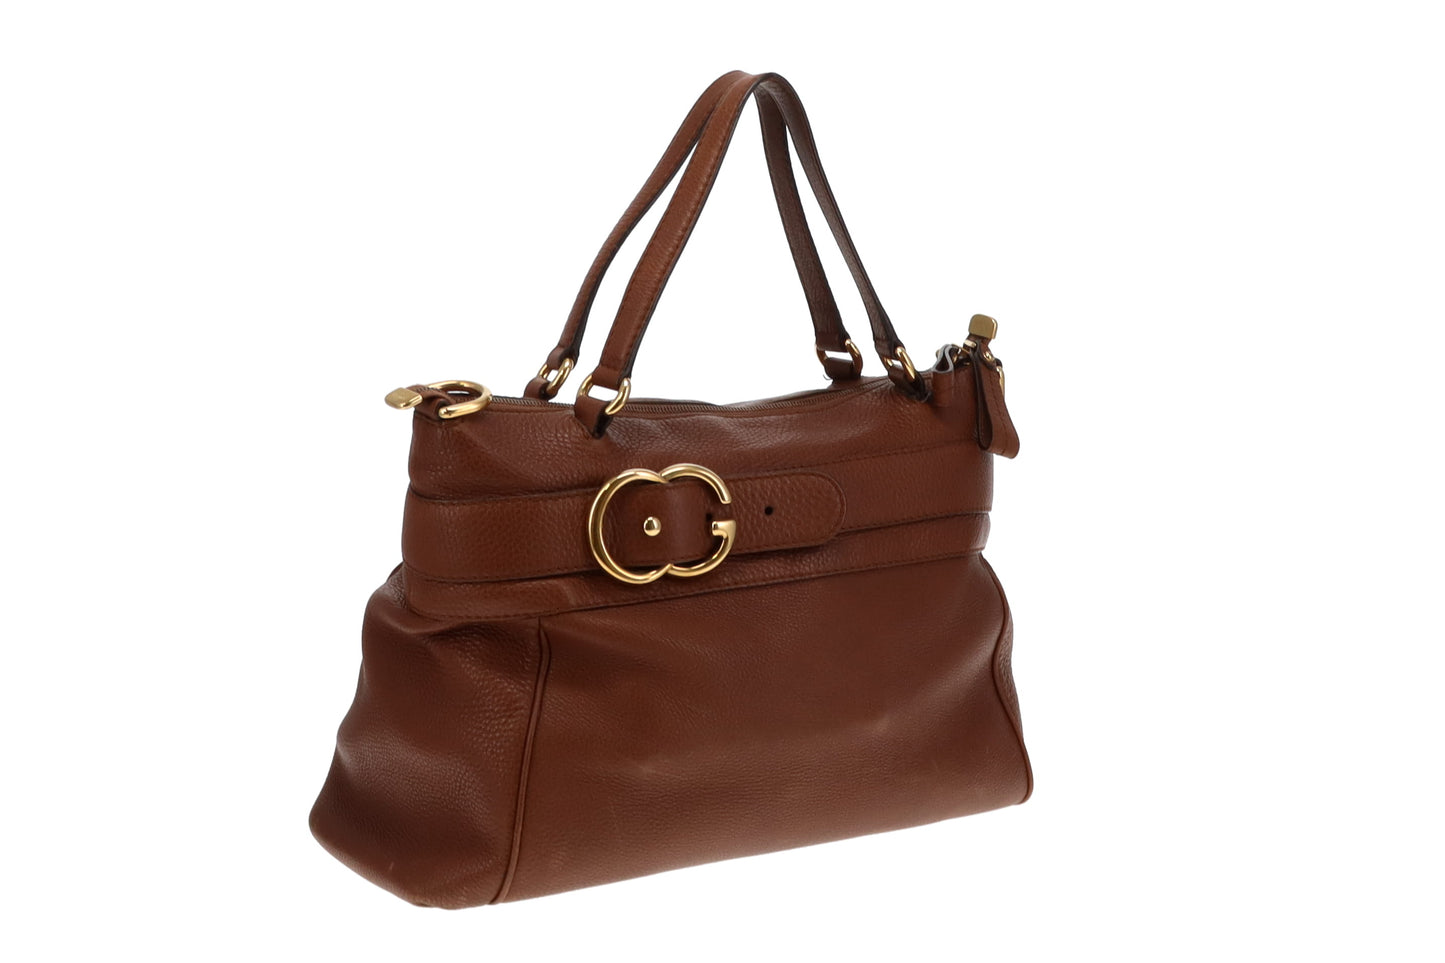 Gucci Tan Leather Ride Hobo With Strap